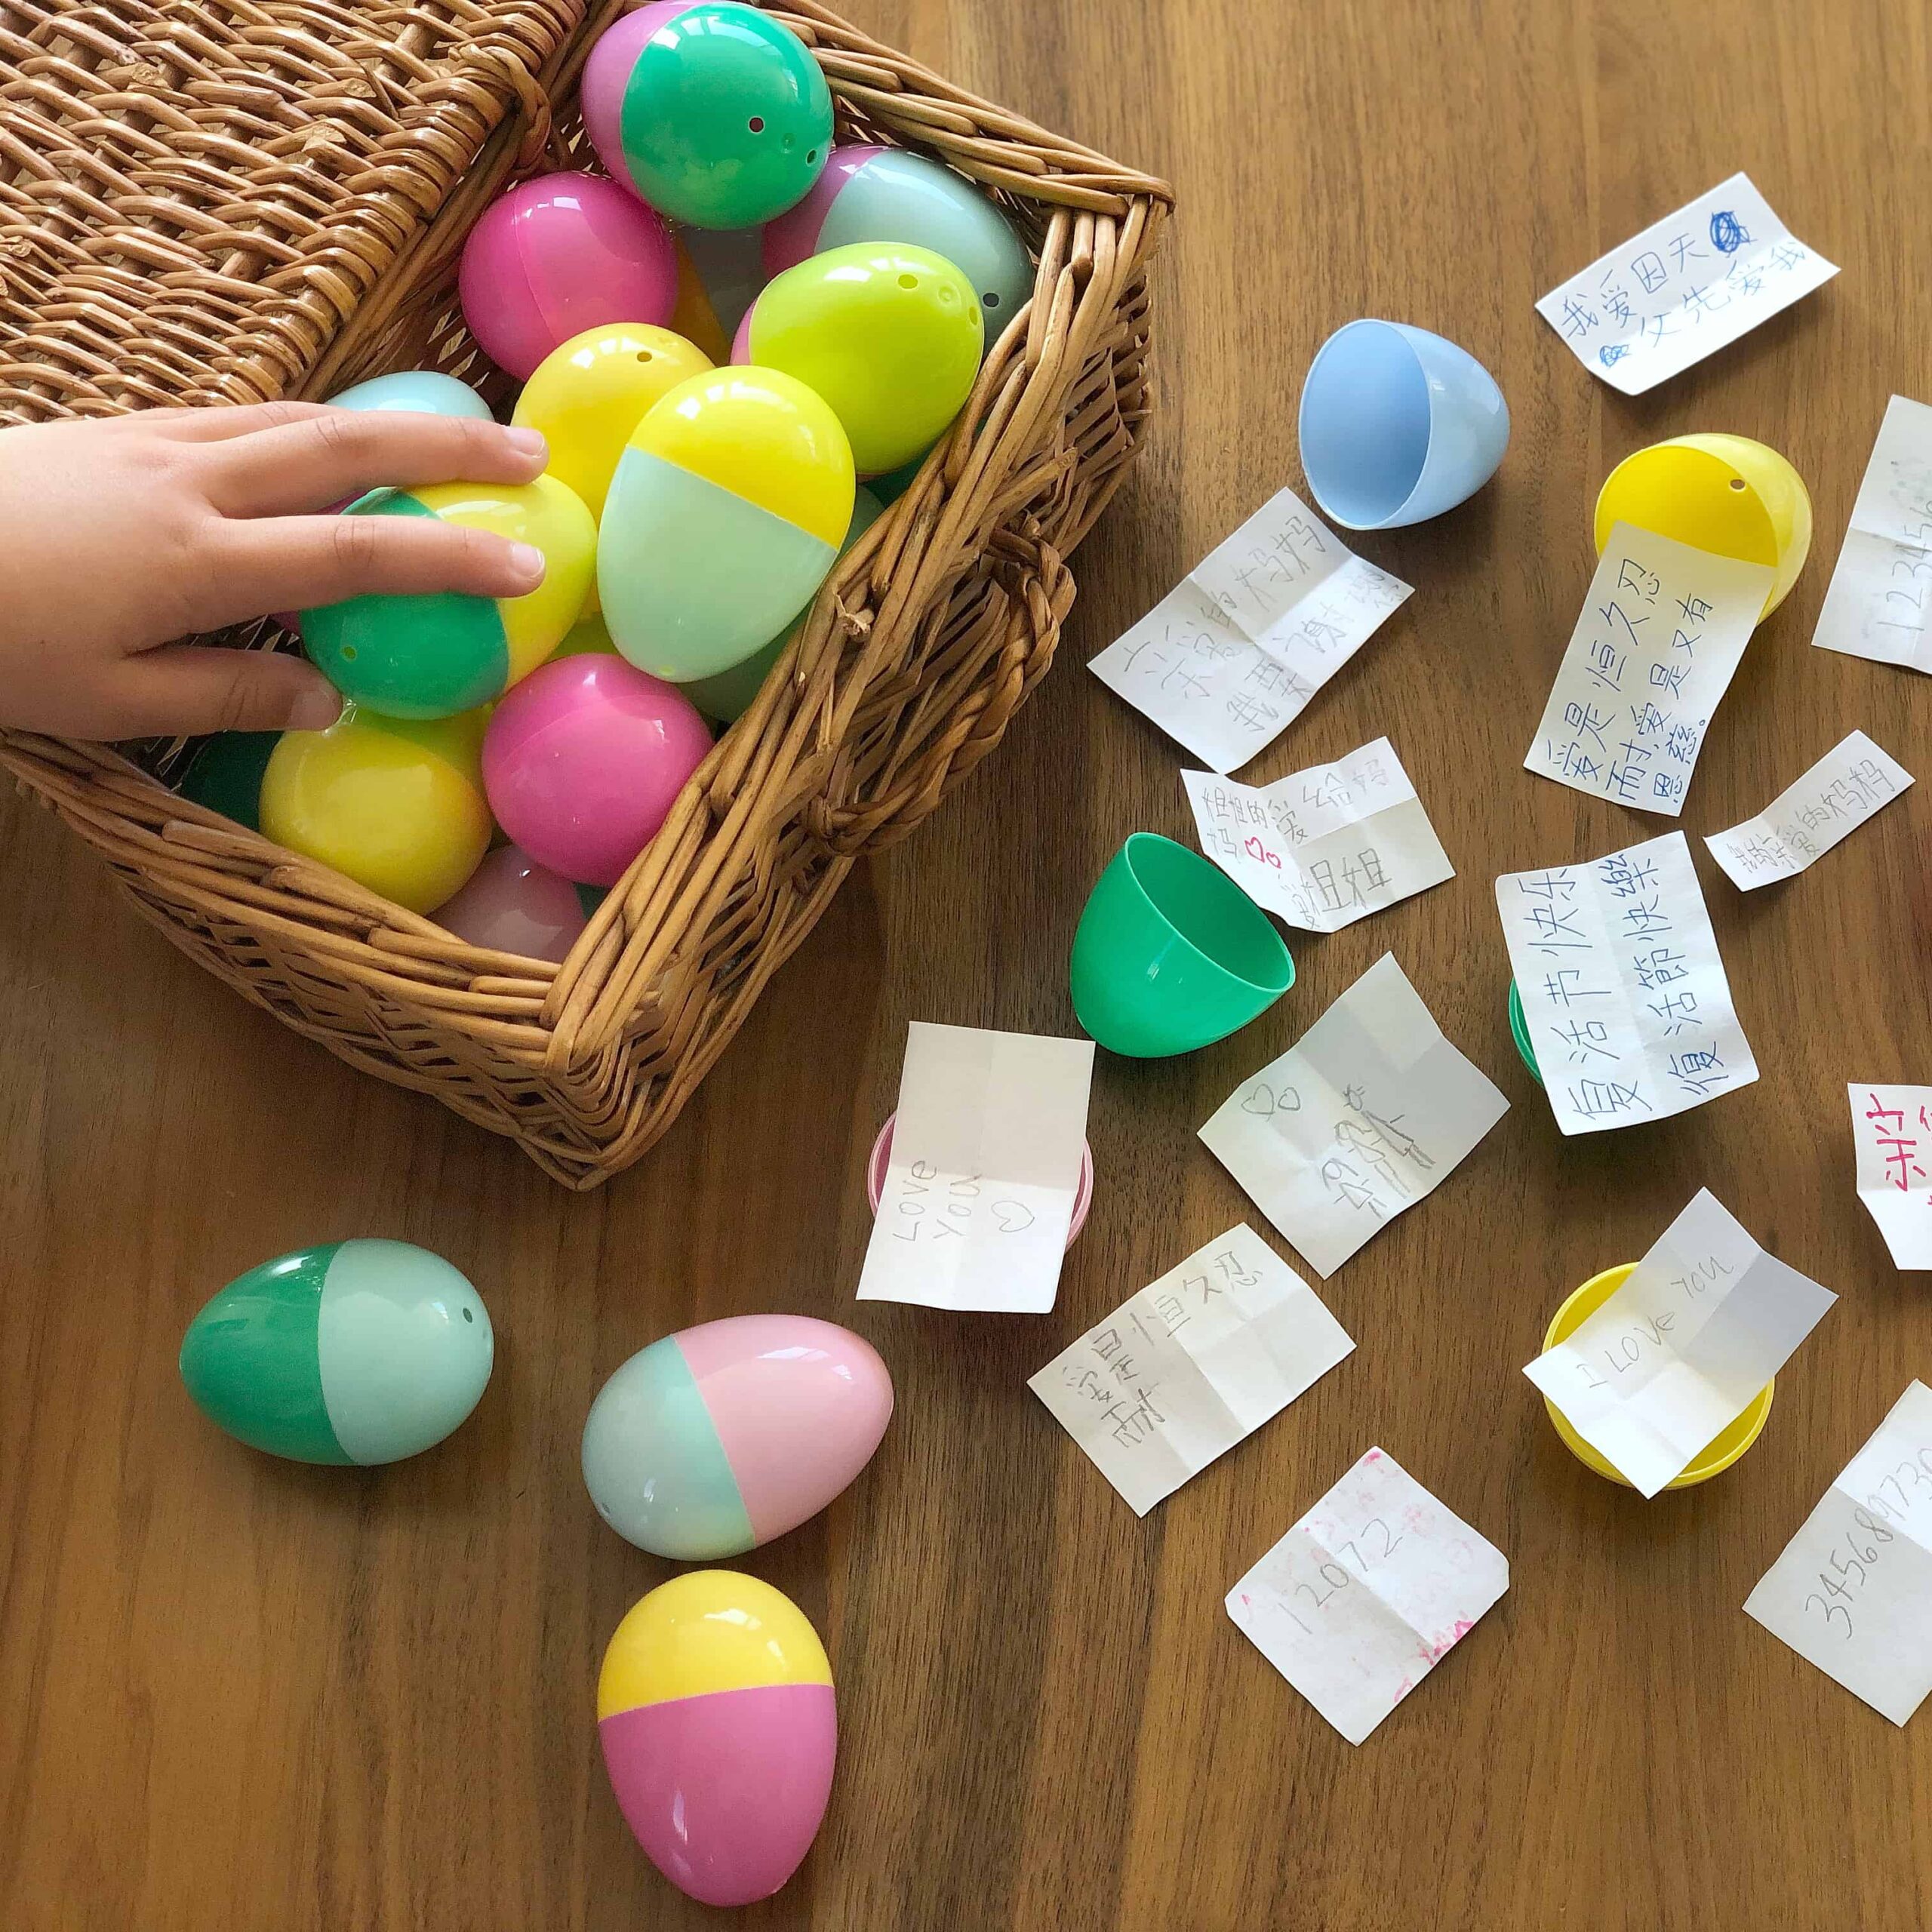 10+ Educational Easter Egg Games – Reading and Math Fun for All Ages!